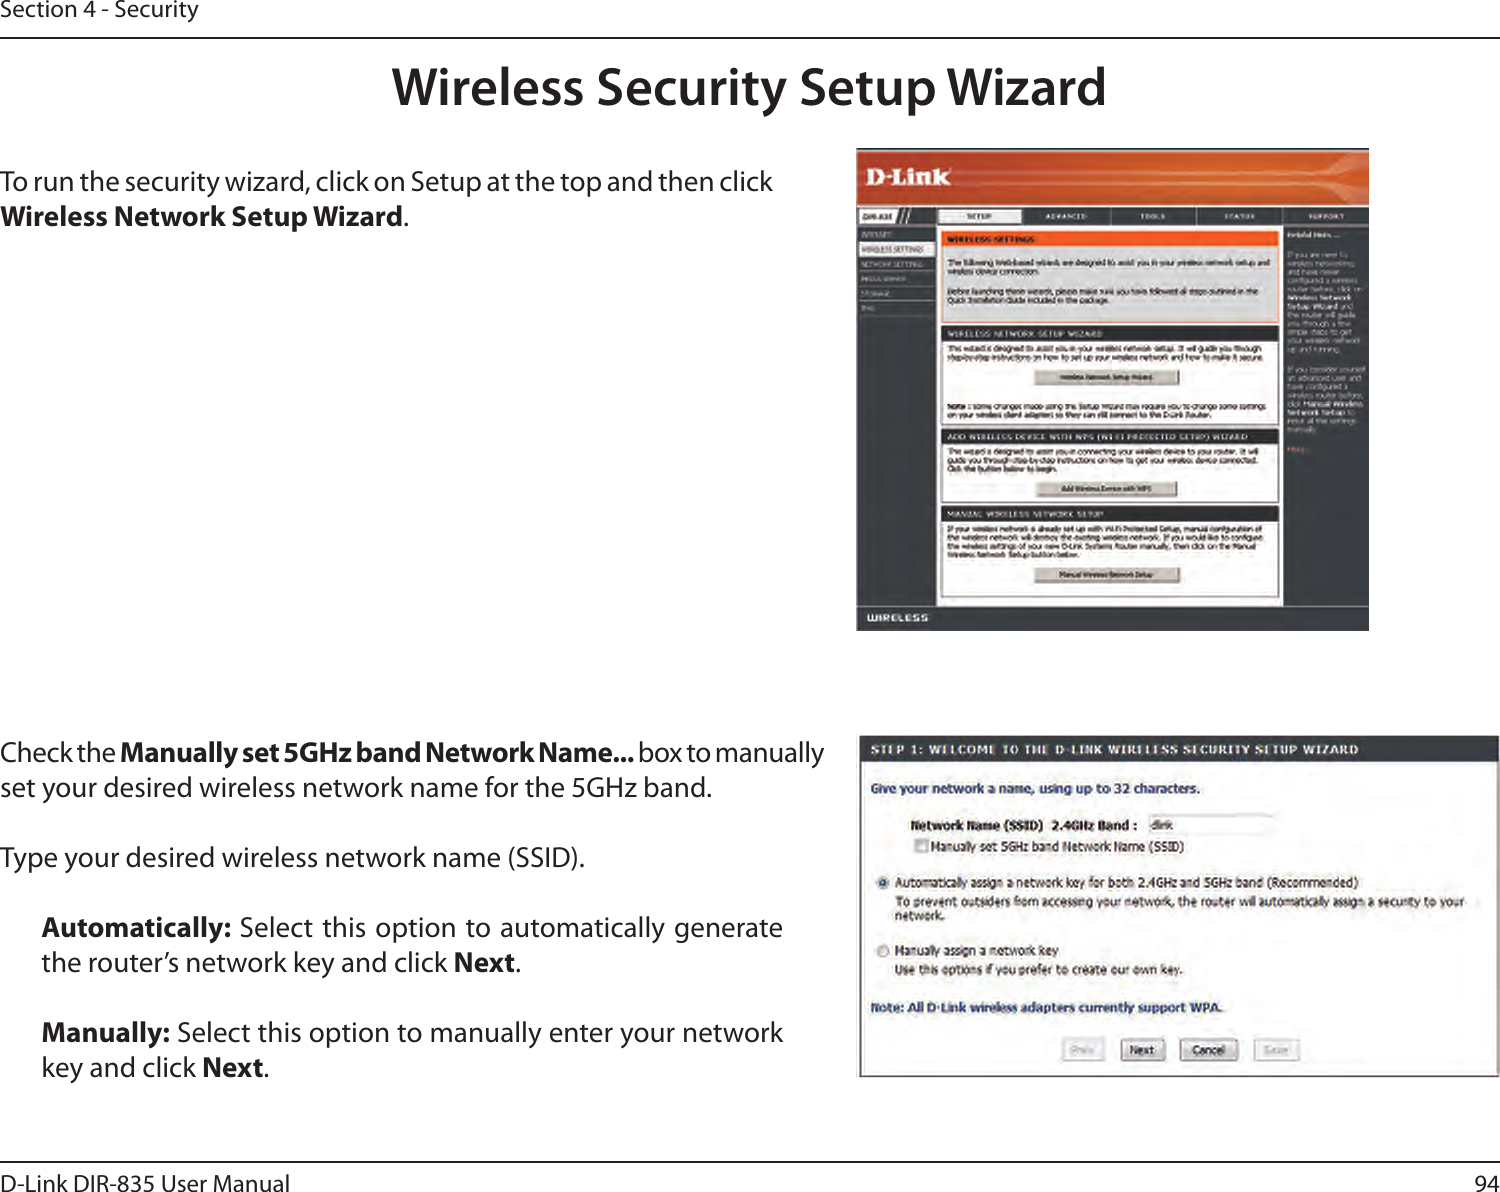 94D-Link DIR-835 User ManualSection 4 - SecurityWireless Security Setup WizardTo run the security wizard, click on Setup at the top and then click Wireless Network Setup Wizard.Check the Manually set 5GHz band Network Name... box to manually set your desired wireless network name for the 5GHz band.Type your desired wireless network name (SSID). Automatically: Select this option to automatically generate the router’s network key and click Next.Manually: Select this option to manually enter your network key and click Next.